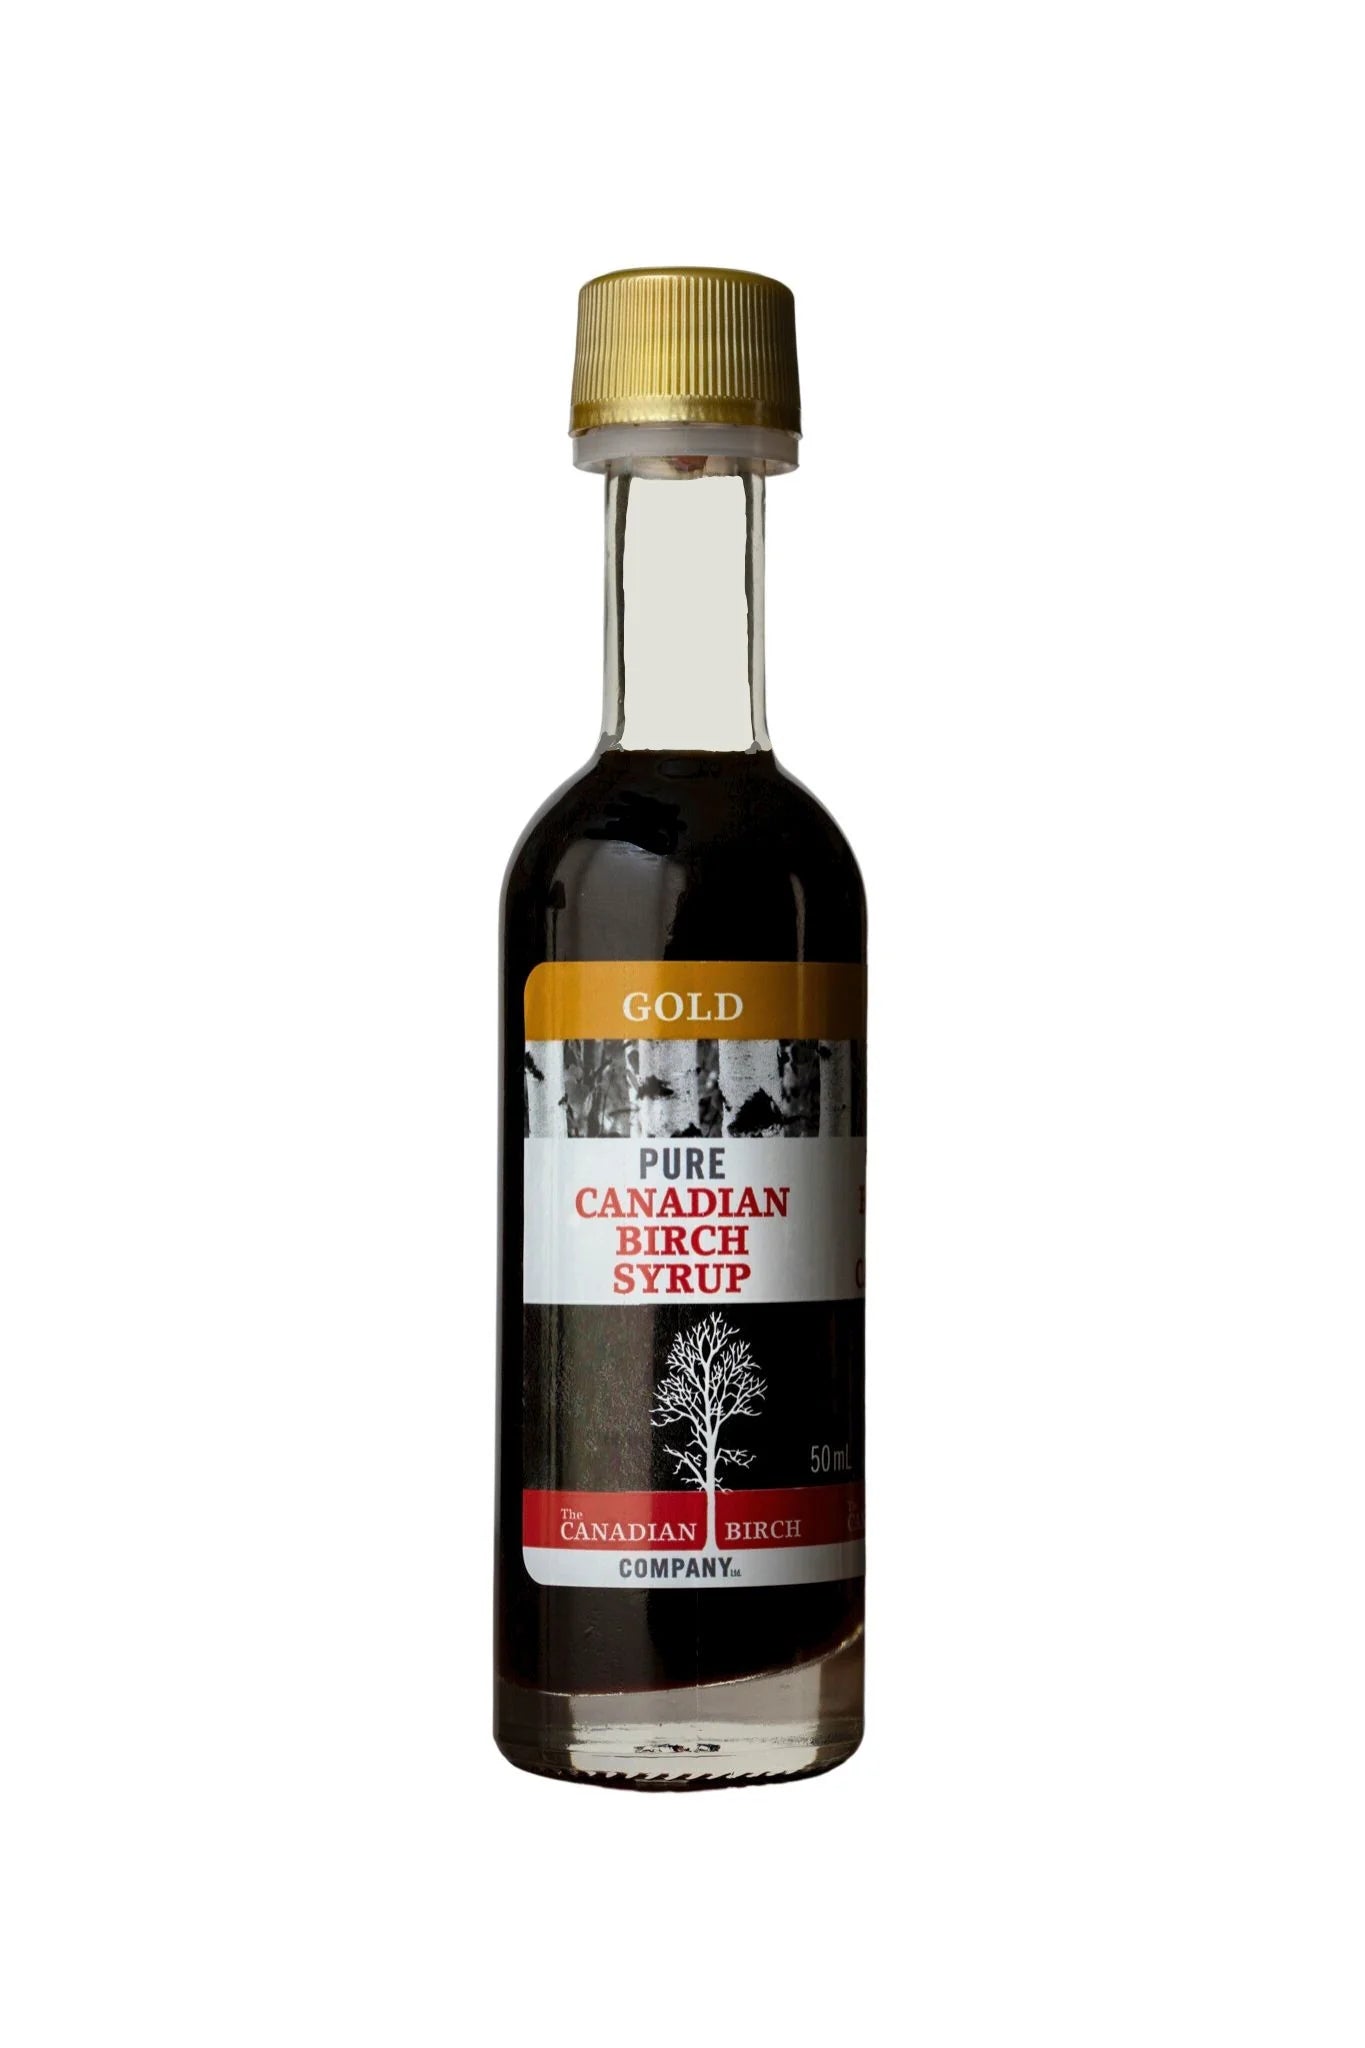 Gold Birch Syrup (50 mL) - The Canadian Birch Company